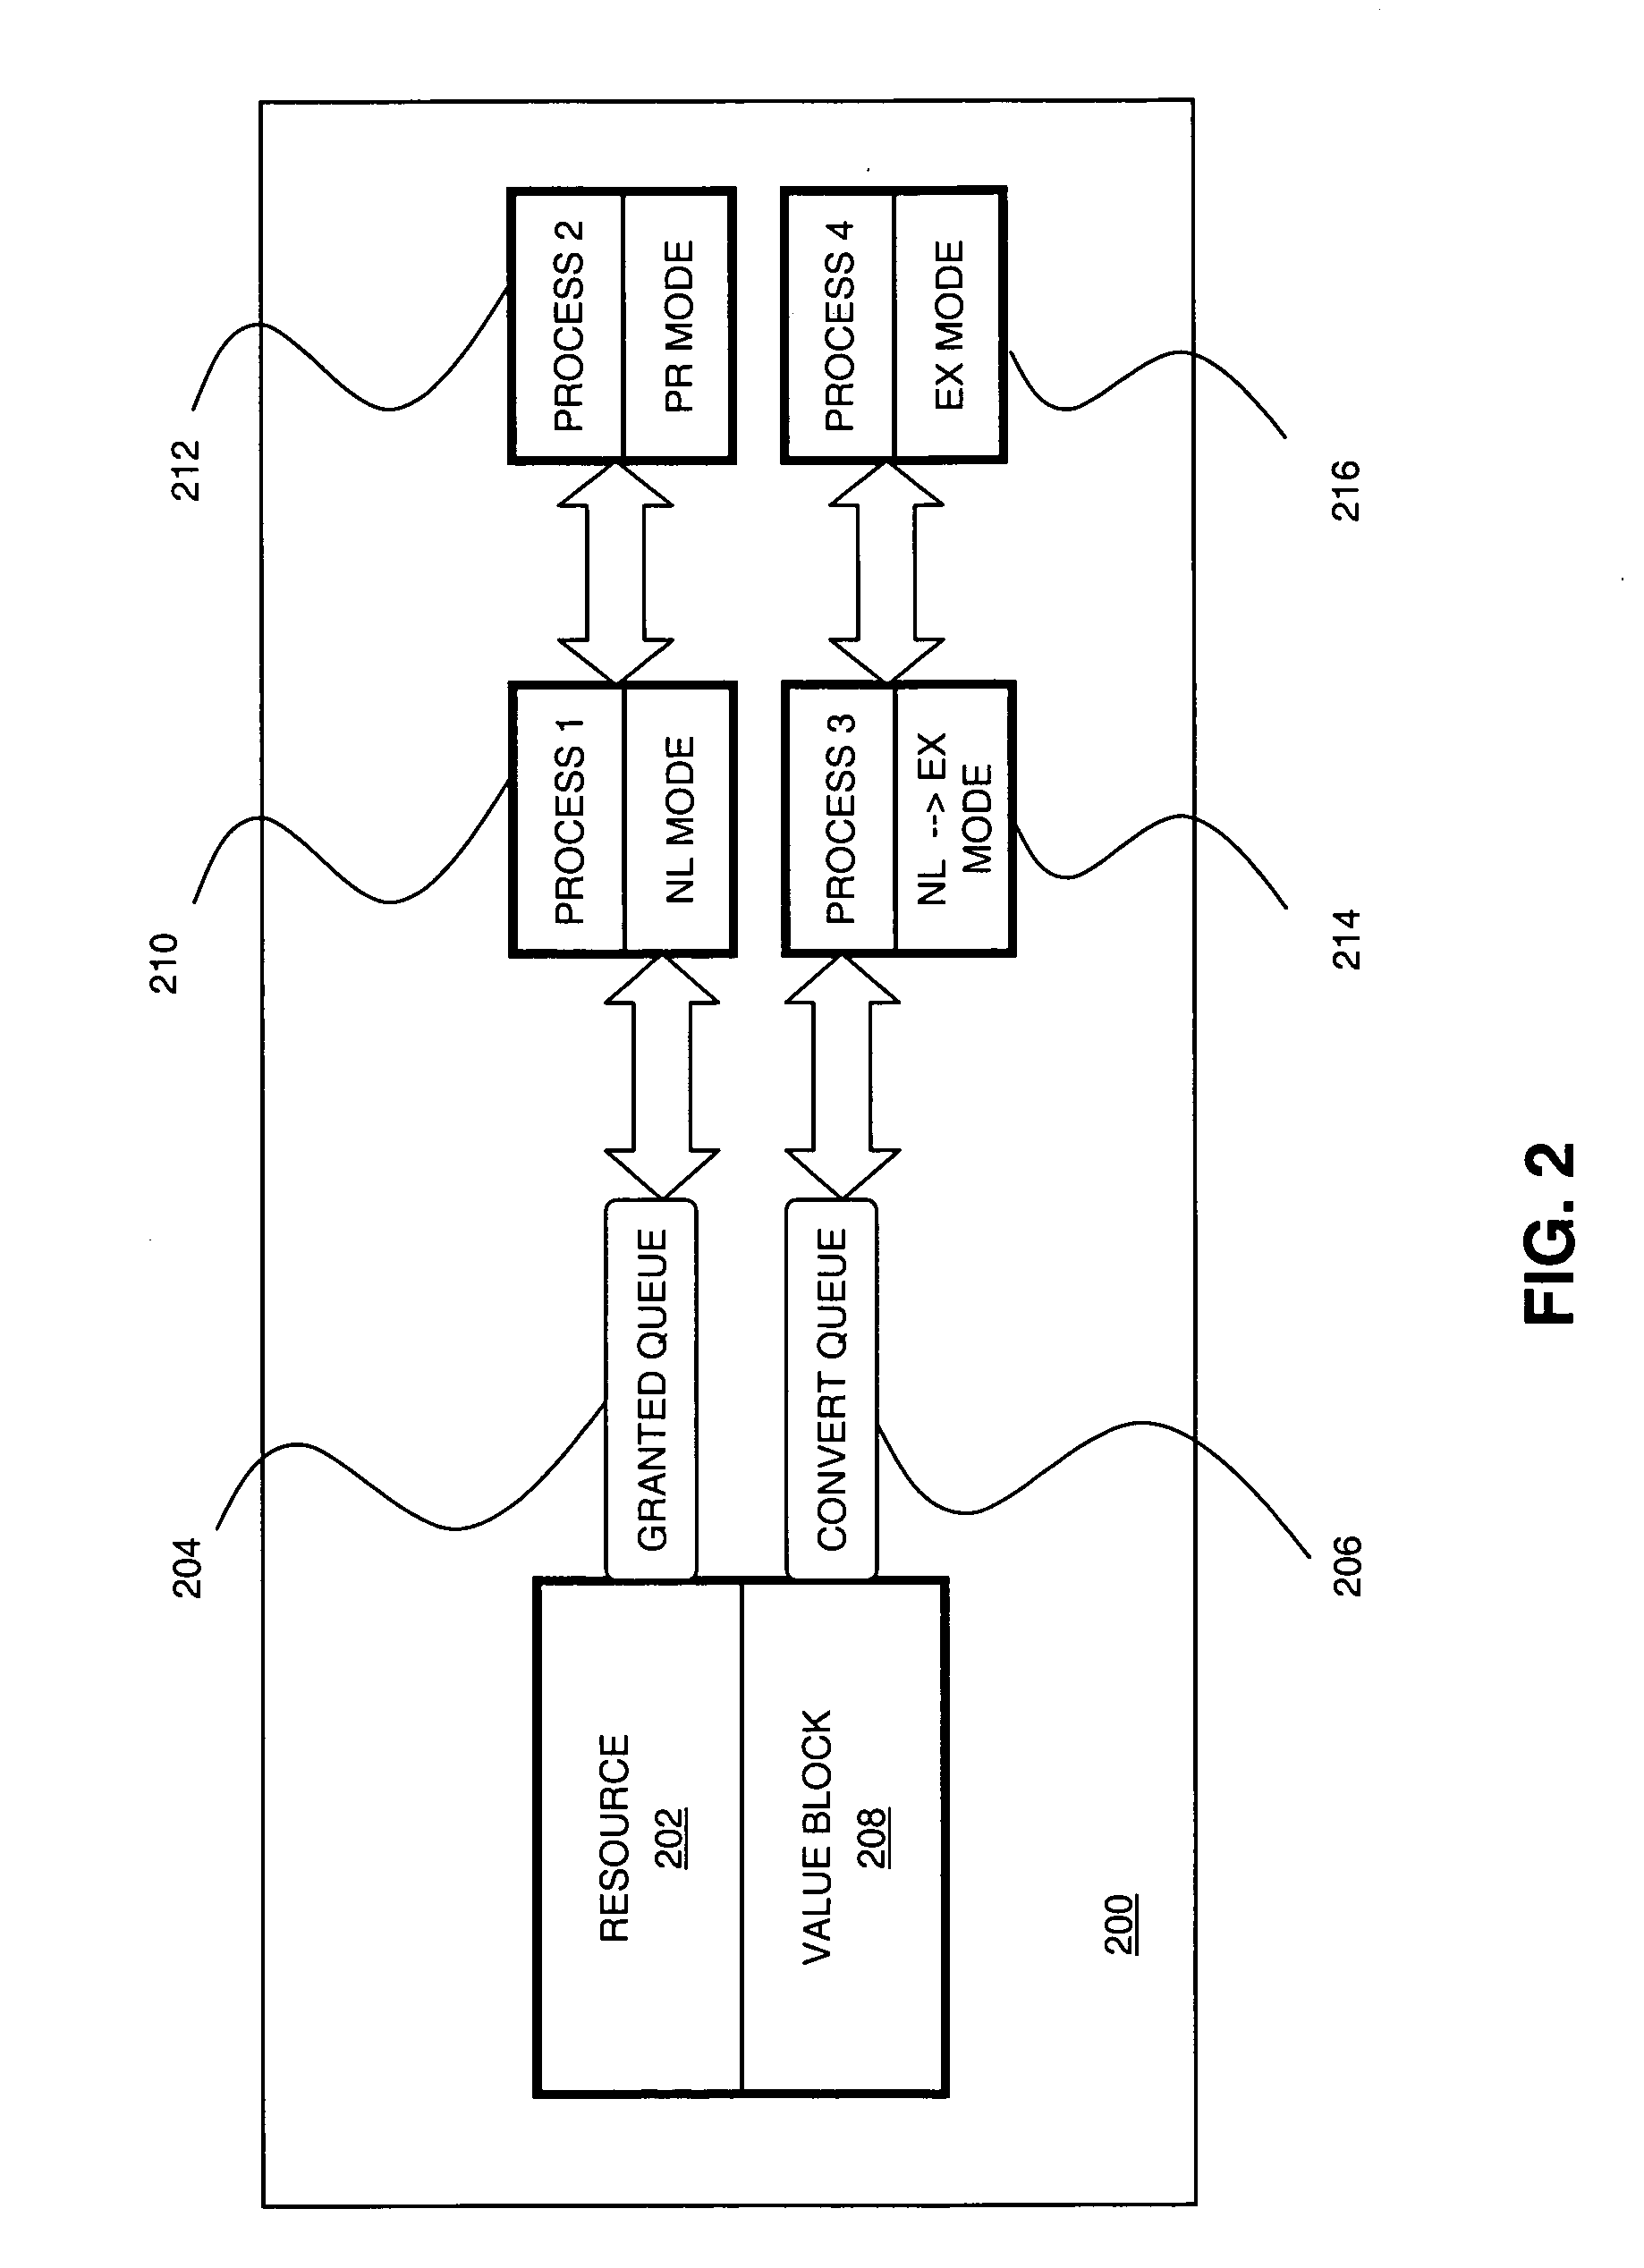 Method and system for deadlock detection in a distributed environment